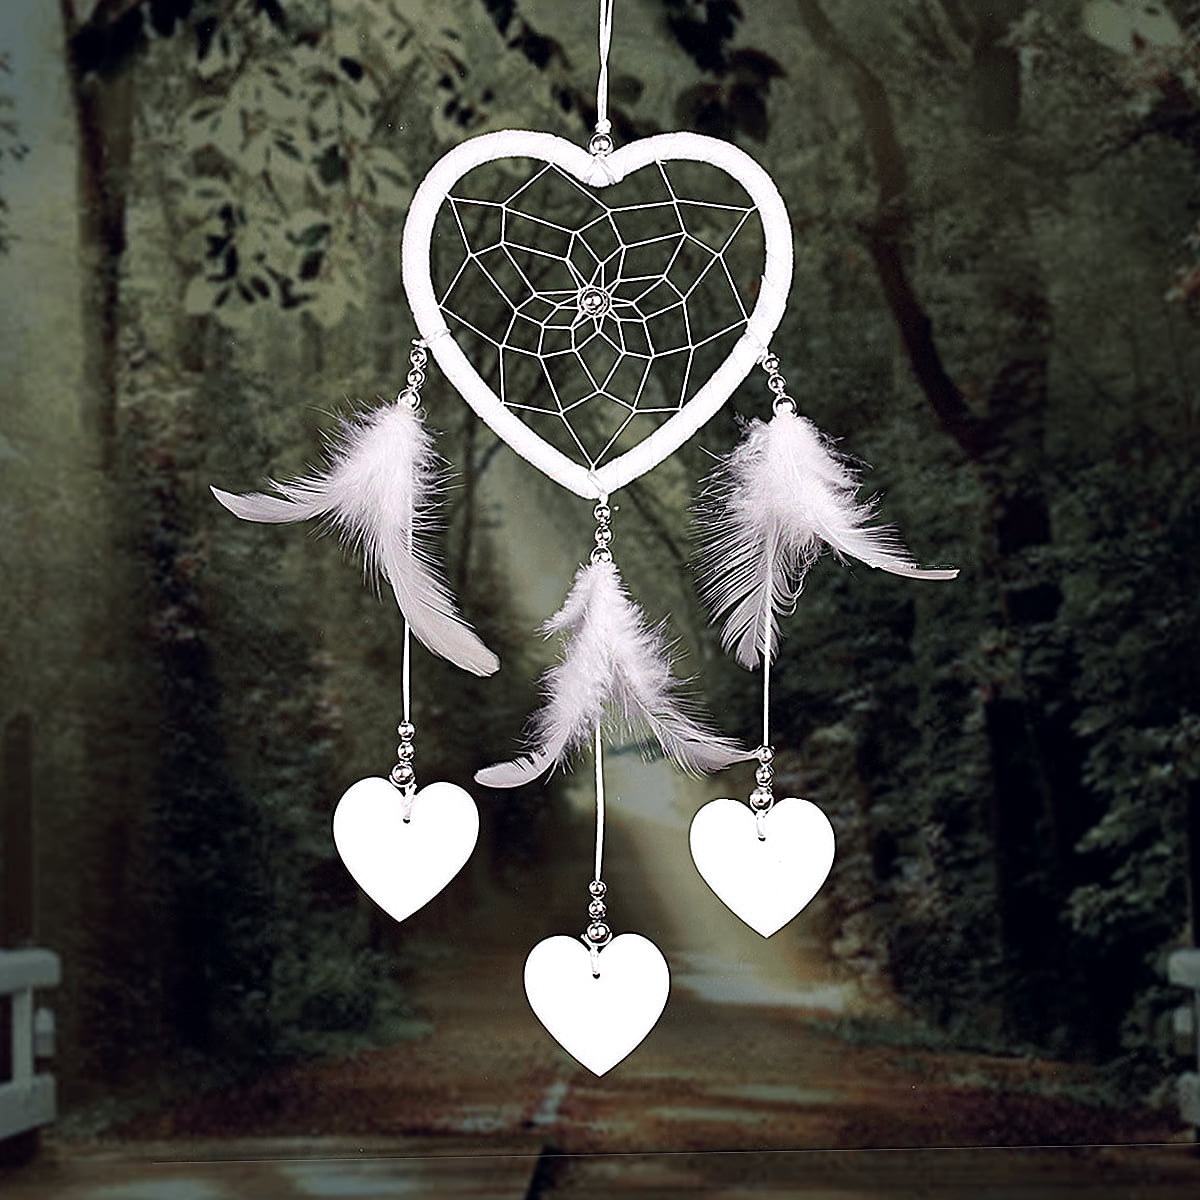 Handmade Dream Catcher With Feathers Car Wall Hanging Decoration Ornament Heart 